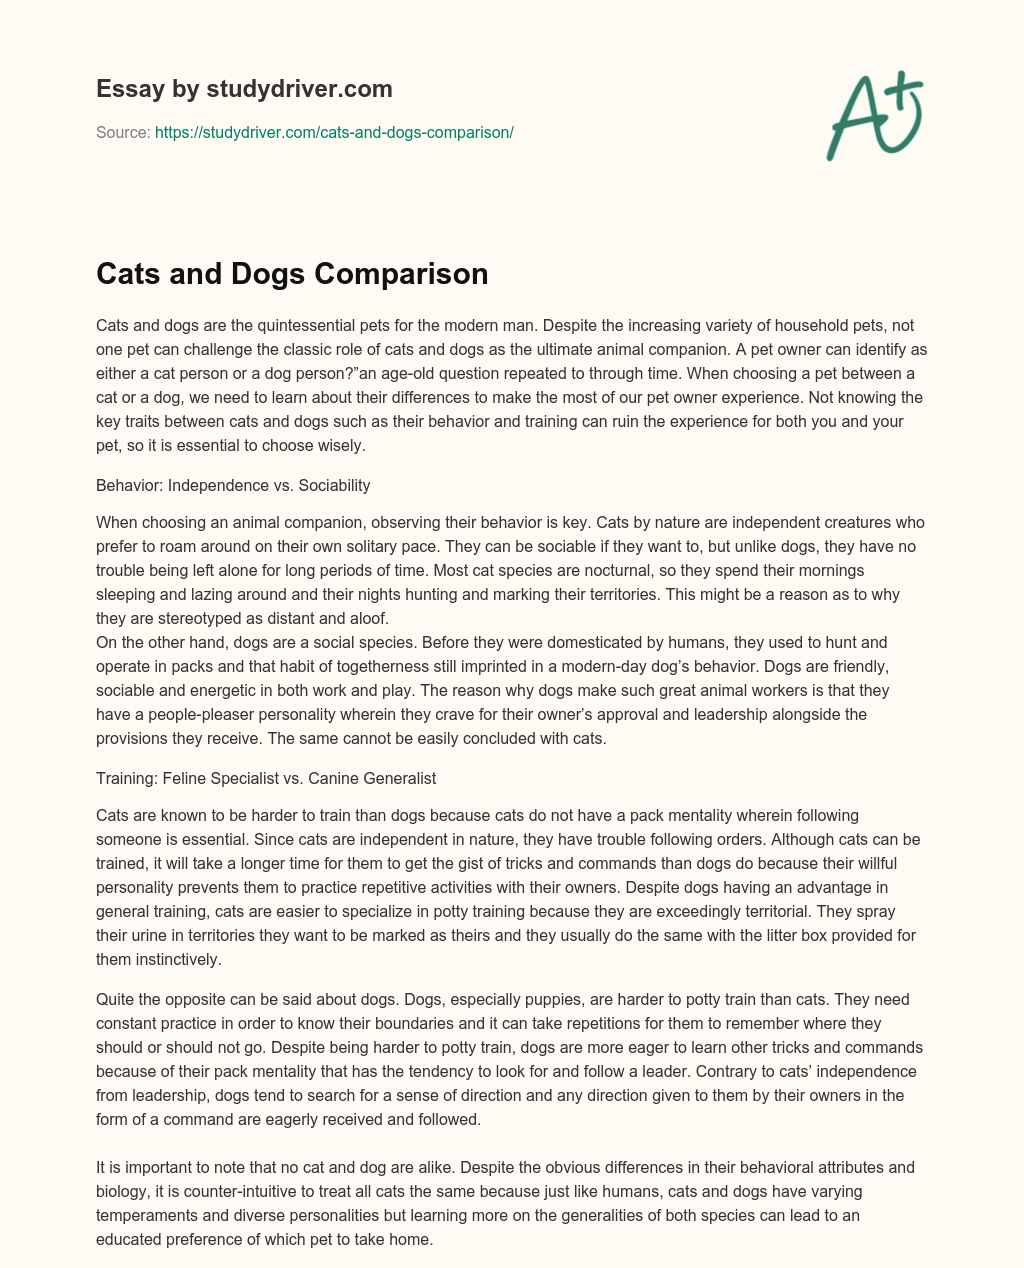 Cats and Dogs Comparison essay